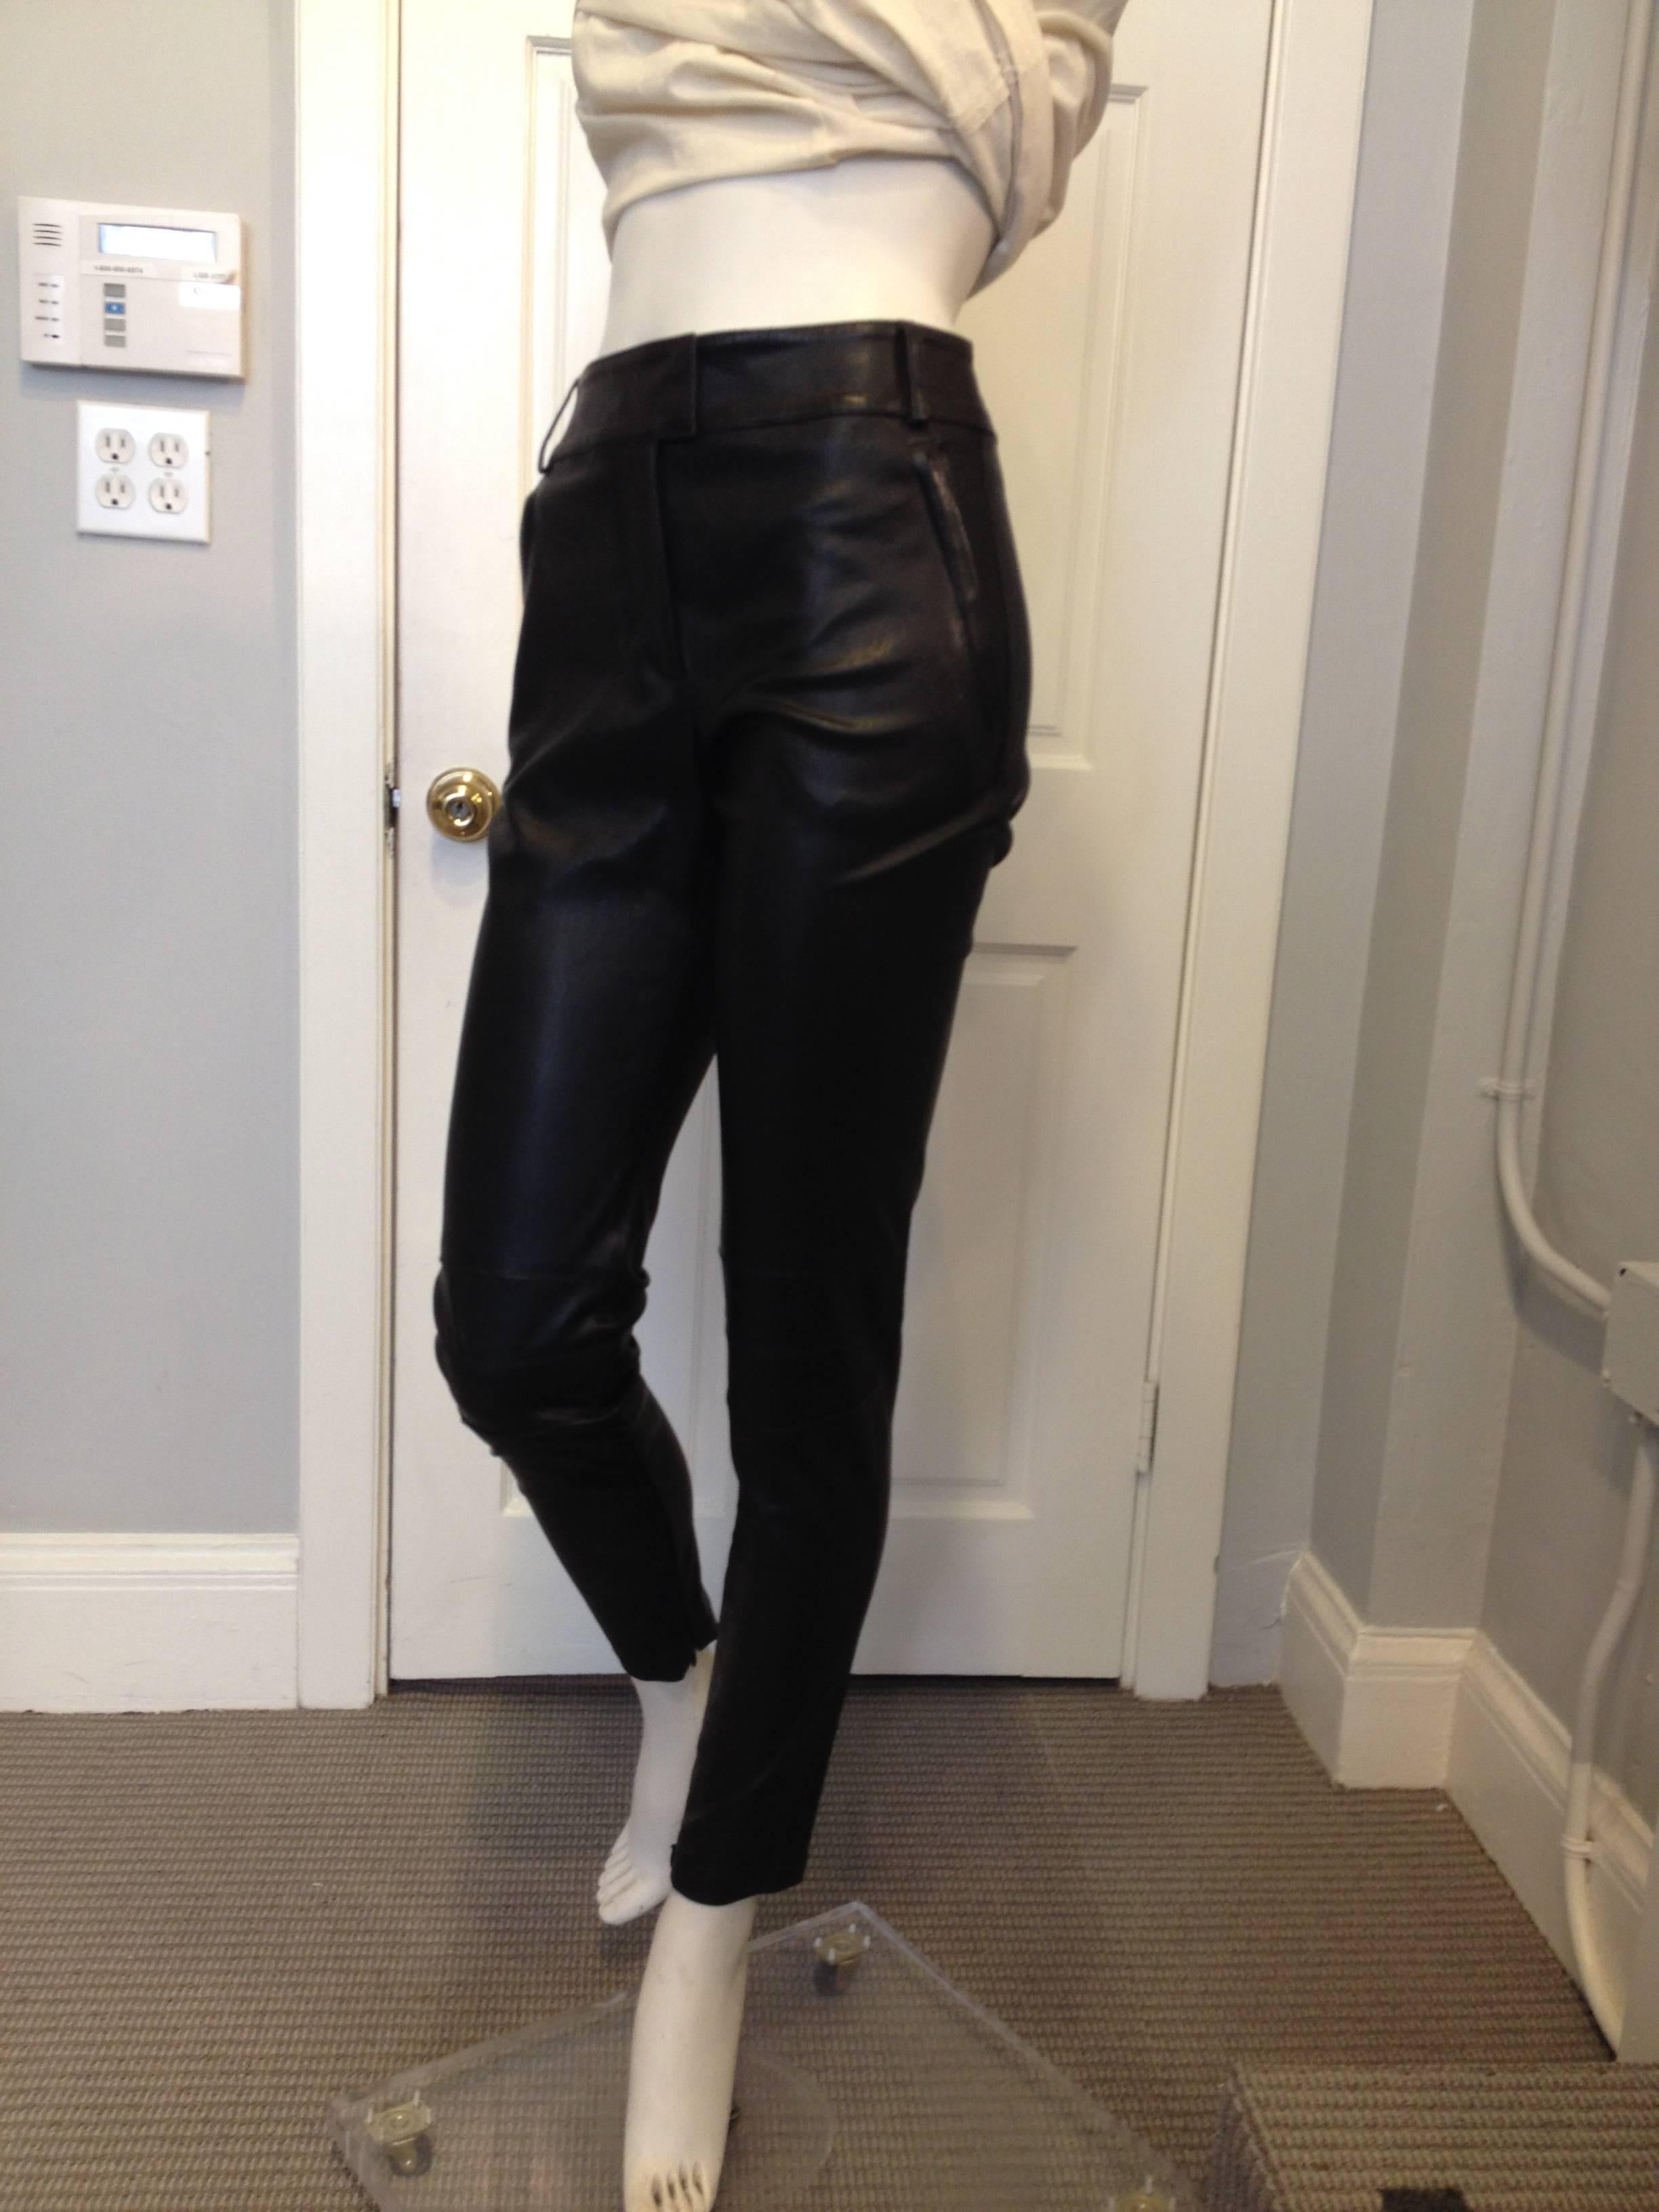 There's nothing more rock & roll than a pair of black leather pants. These have all of the attitude that Givenchy embodies - they're cut super skinny, with zippers at the ankles and crossing belt loops in the shape of an X at the back. The leather